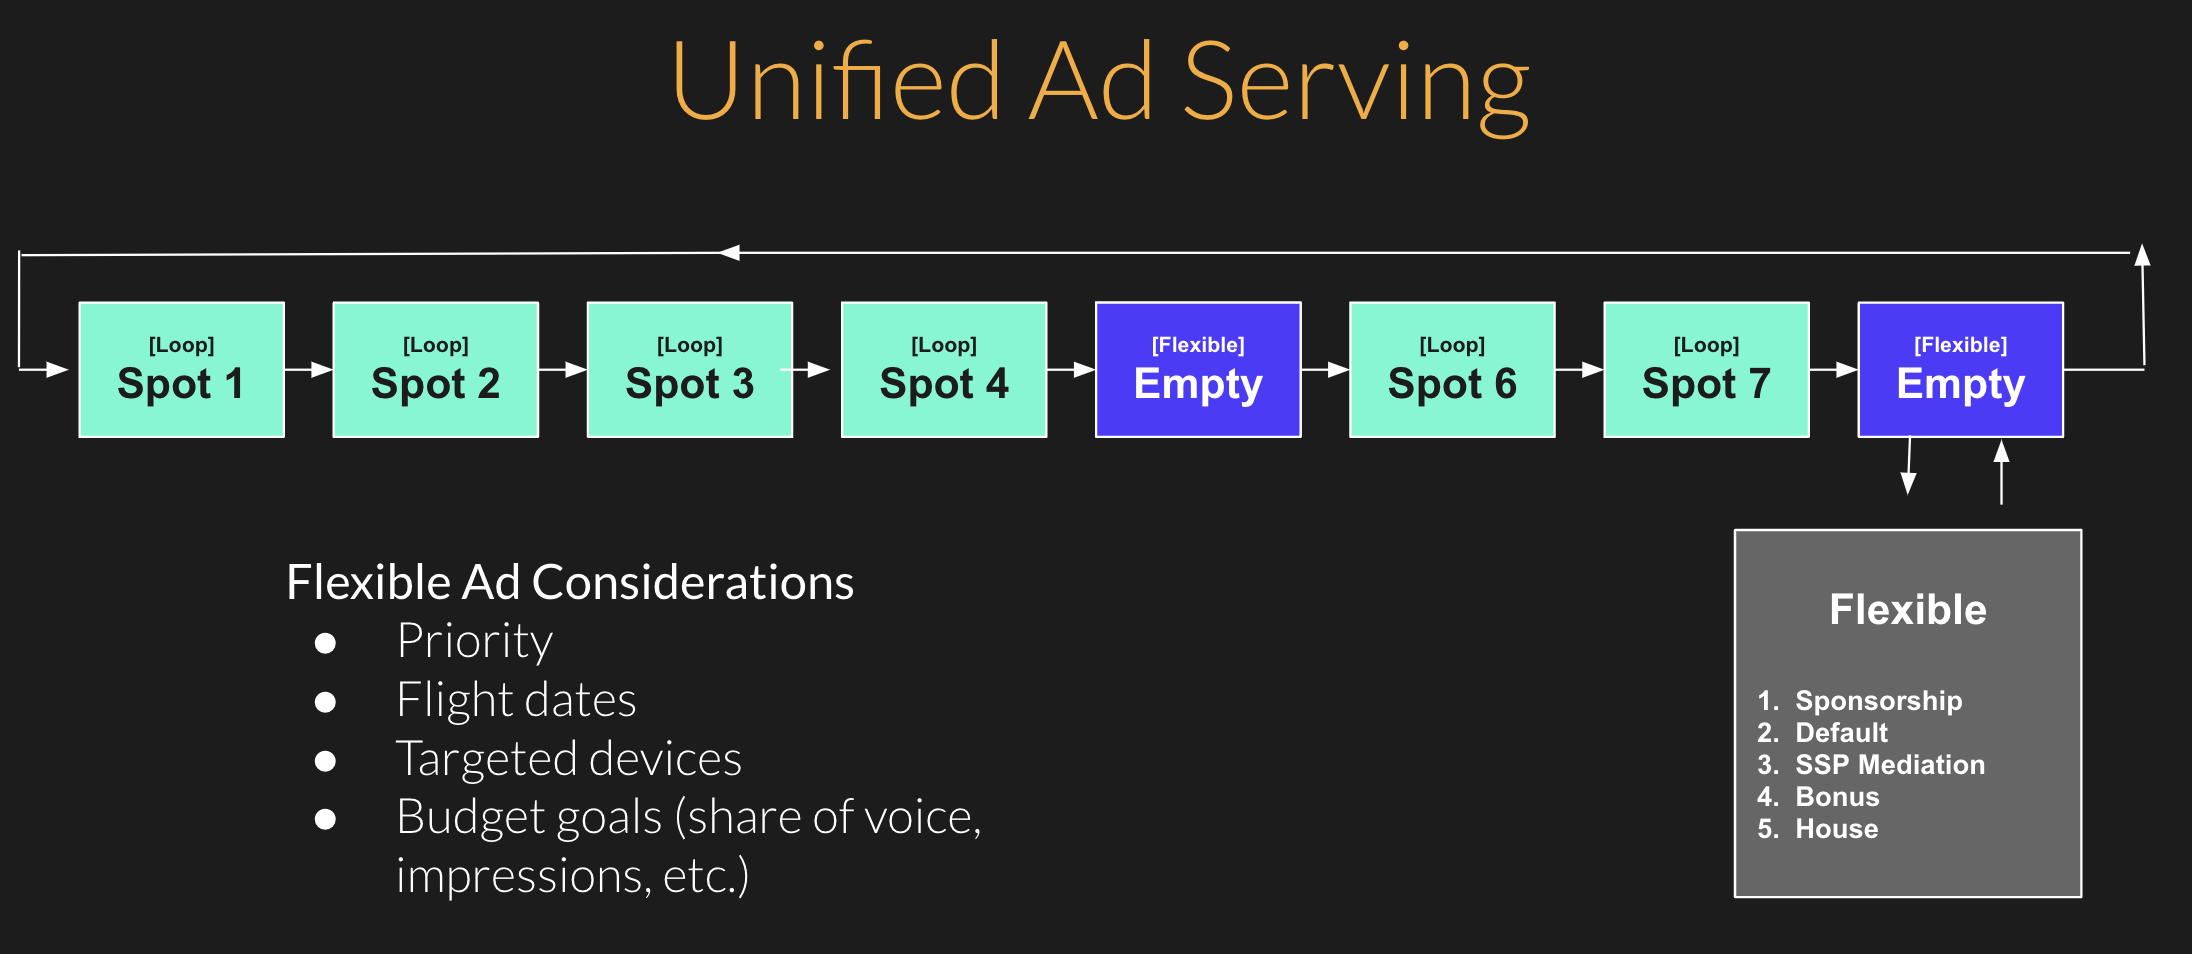 Unified ad serving DOOH